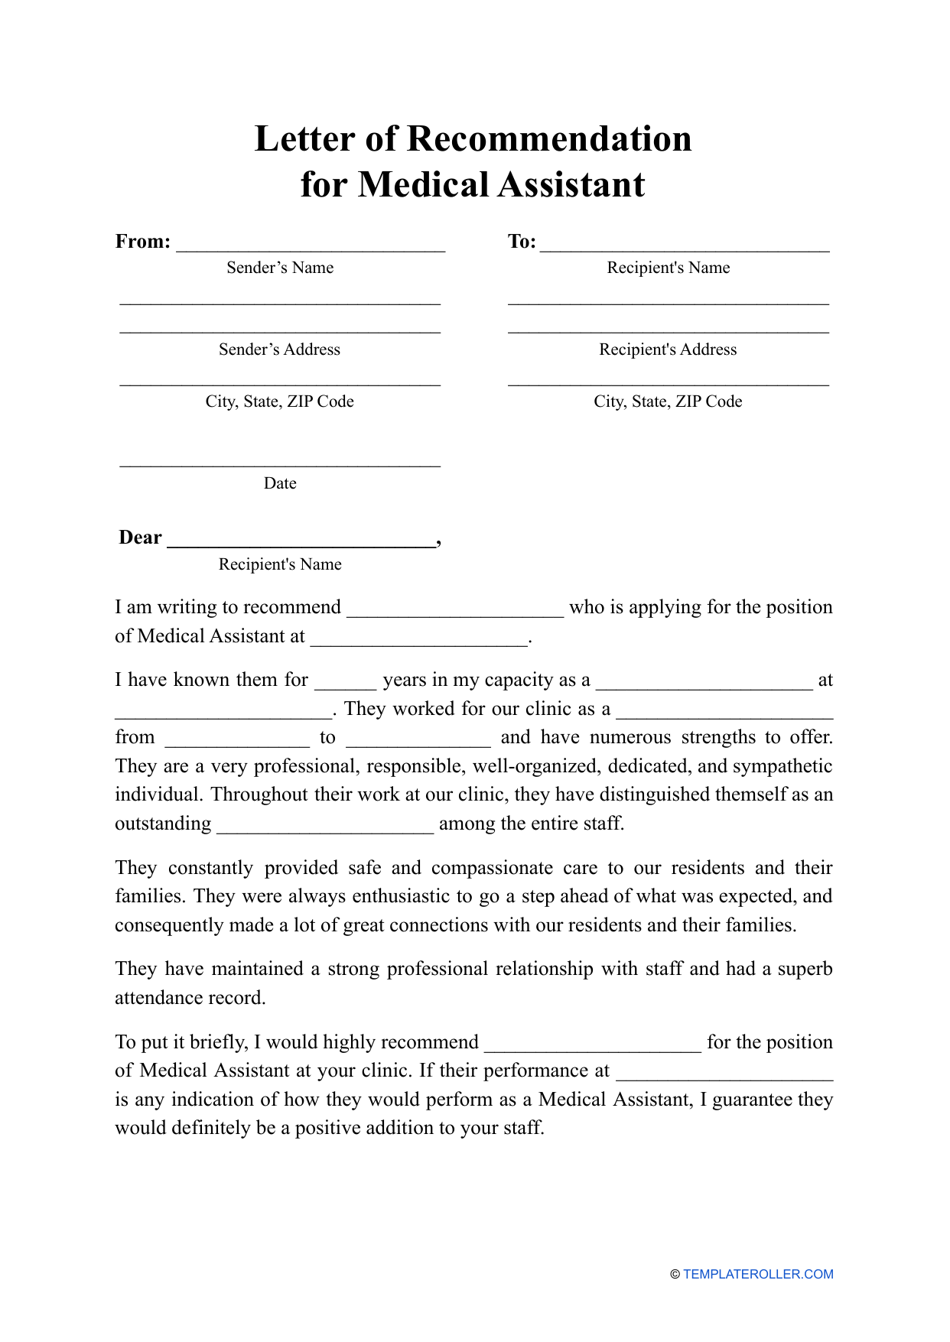 Letter of Recommendation for Medical Assistant Template - Doctor and nurse discussing medical reports